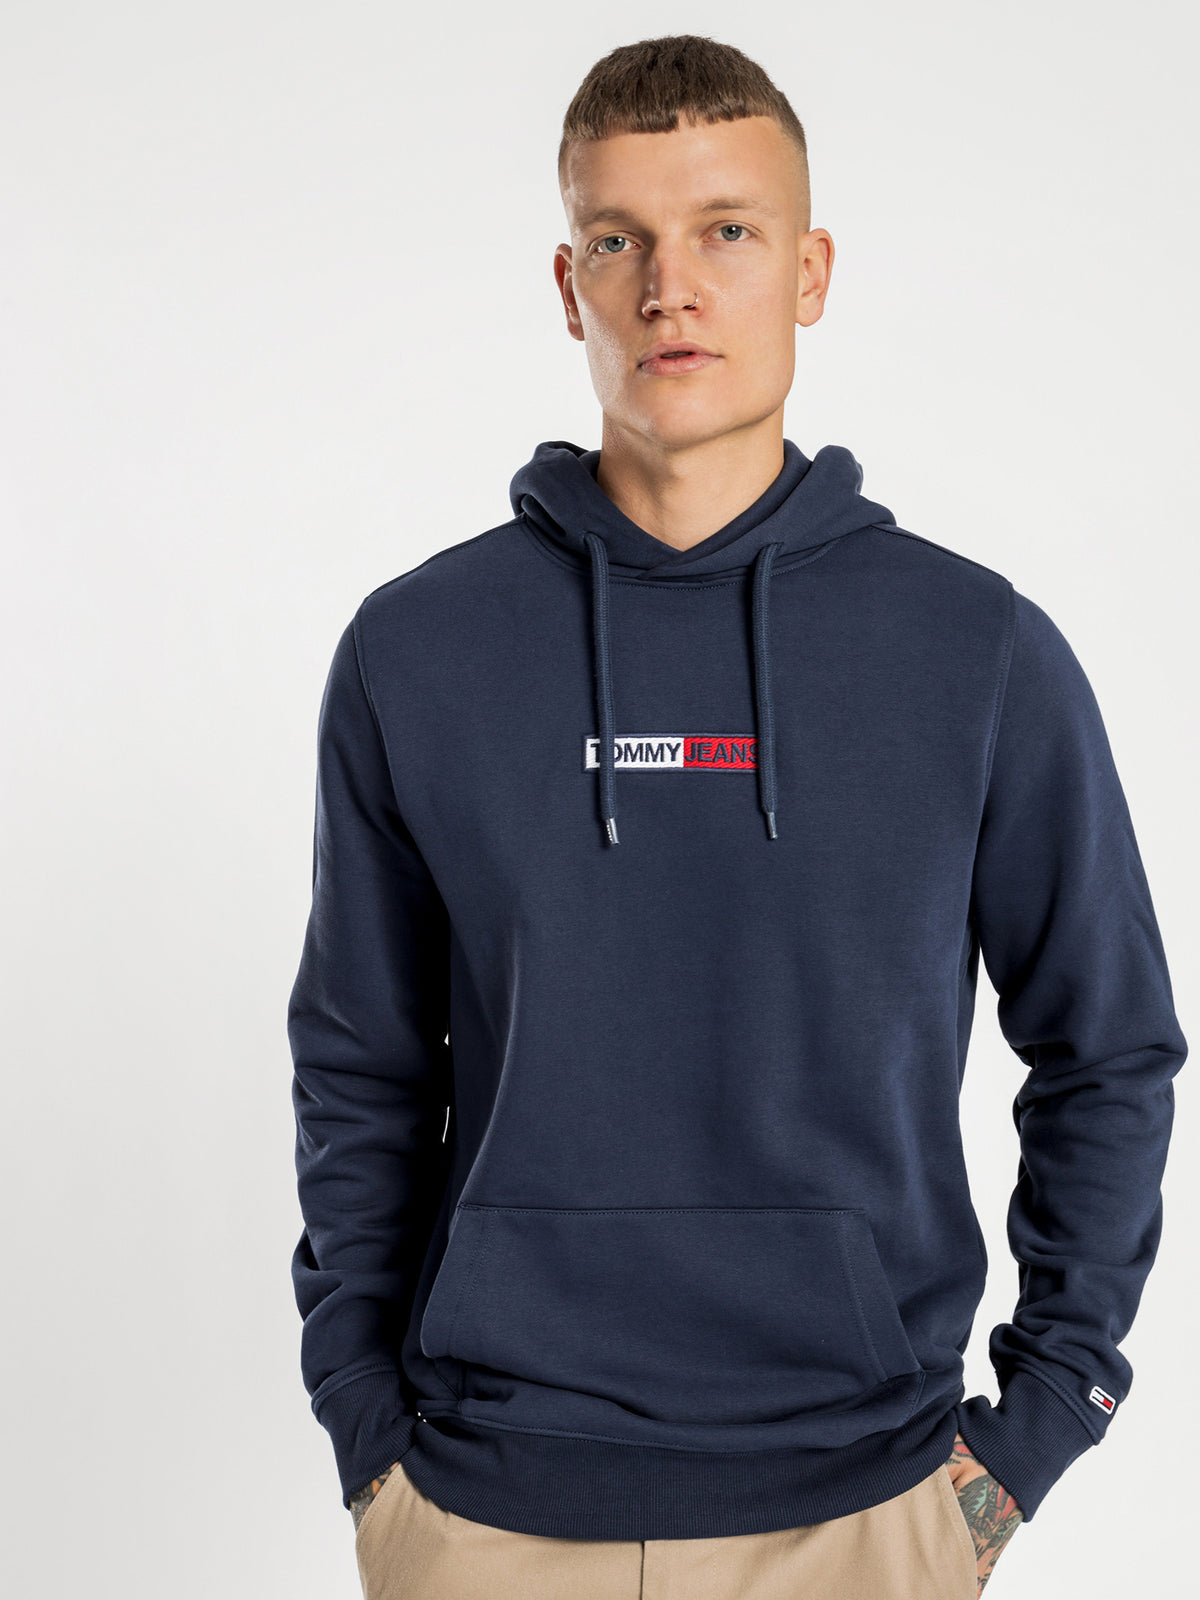 Embroidered Box Hoodie in Navy